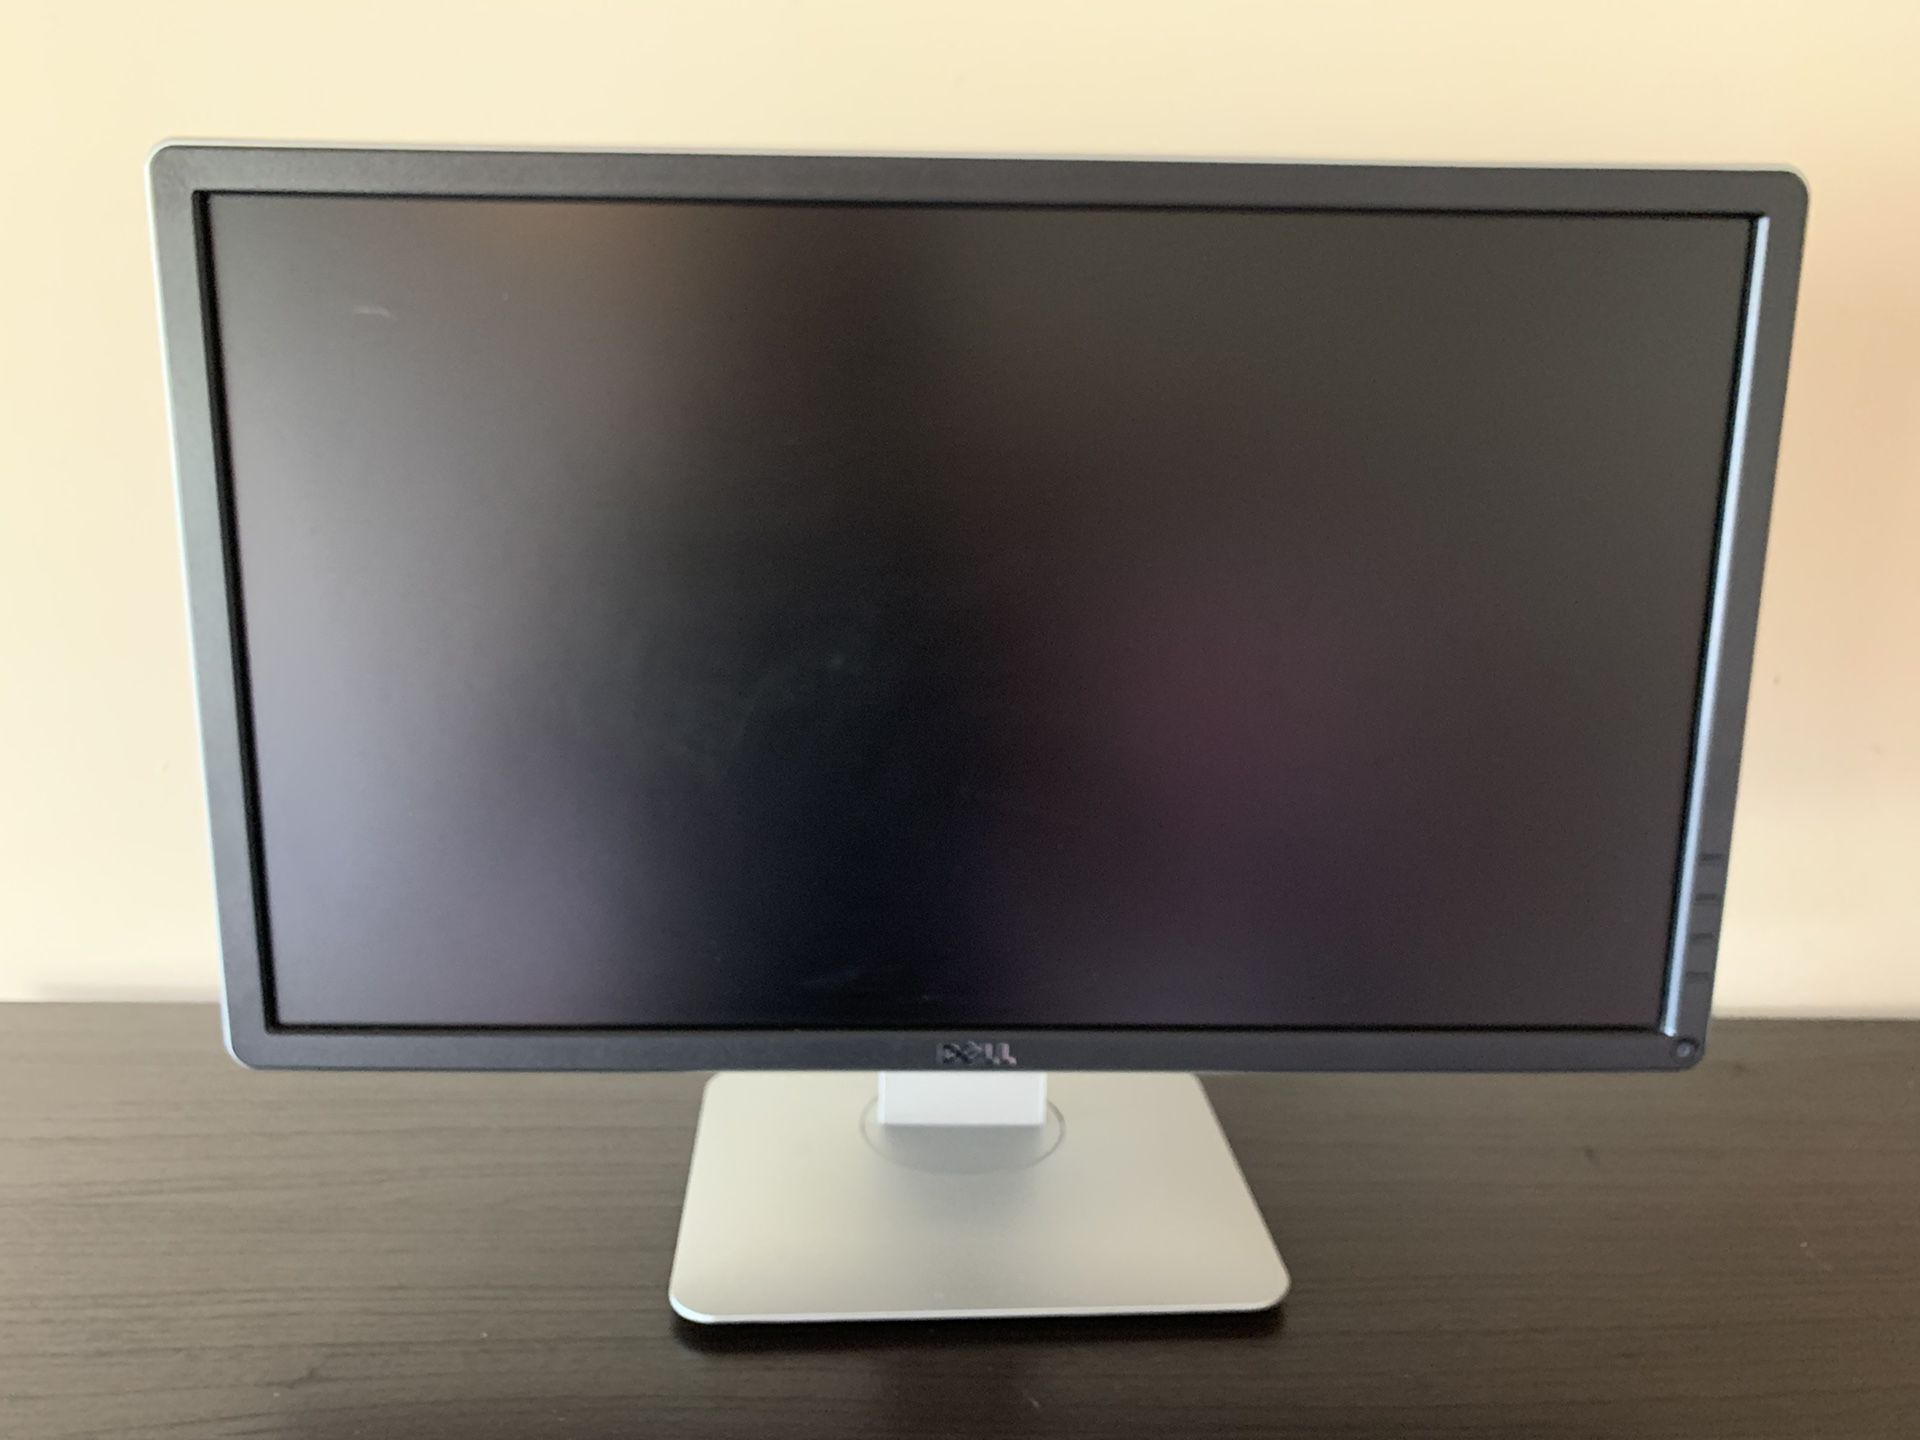 Dell P2314Ht 1920 x 1080 Resolution 23" WideScreen LCD Flat Panel Computer Monitor Display